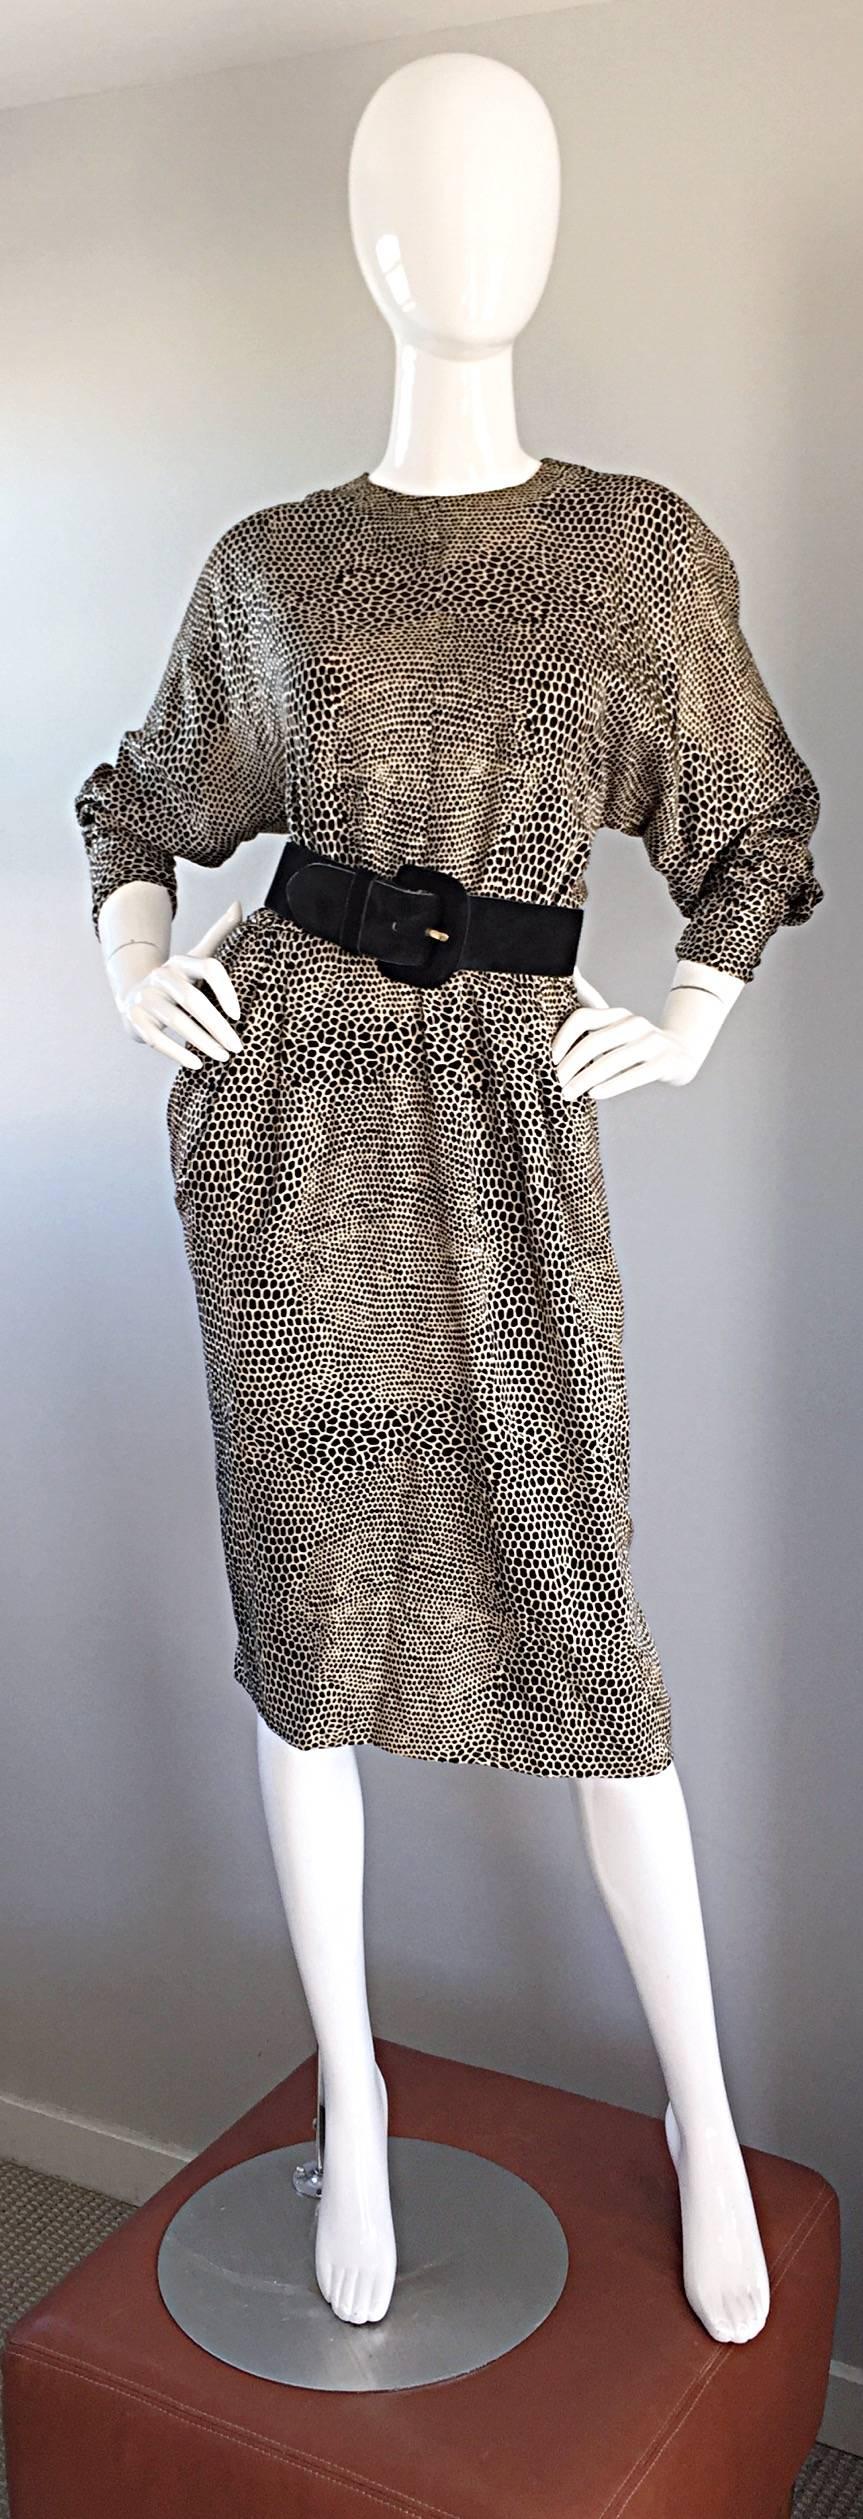 Striking vintage ADELE SIMPSON for NEIMAN MARCUS black and ivory tejus lizard print dress! Features flattering dolman sleeves, which can accommodate an array of bust sizes. Sleek tailored sleeves, with snaps at each cuff to ensure a proper fit at